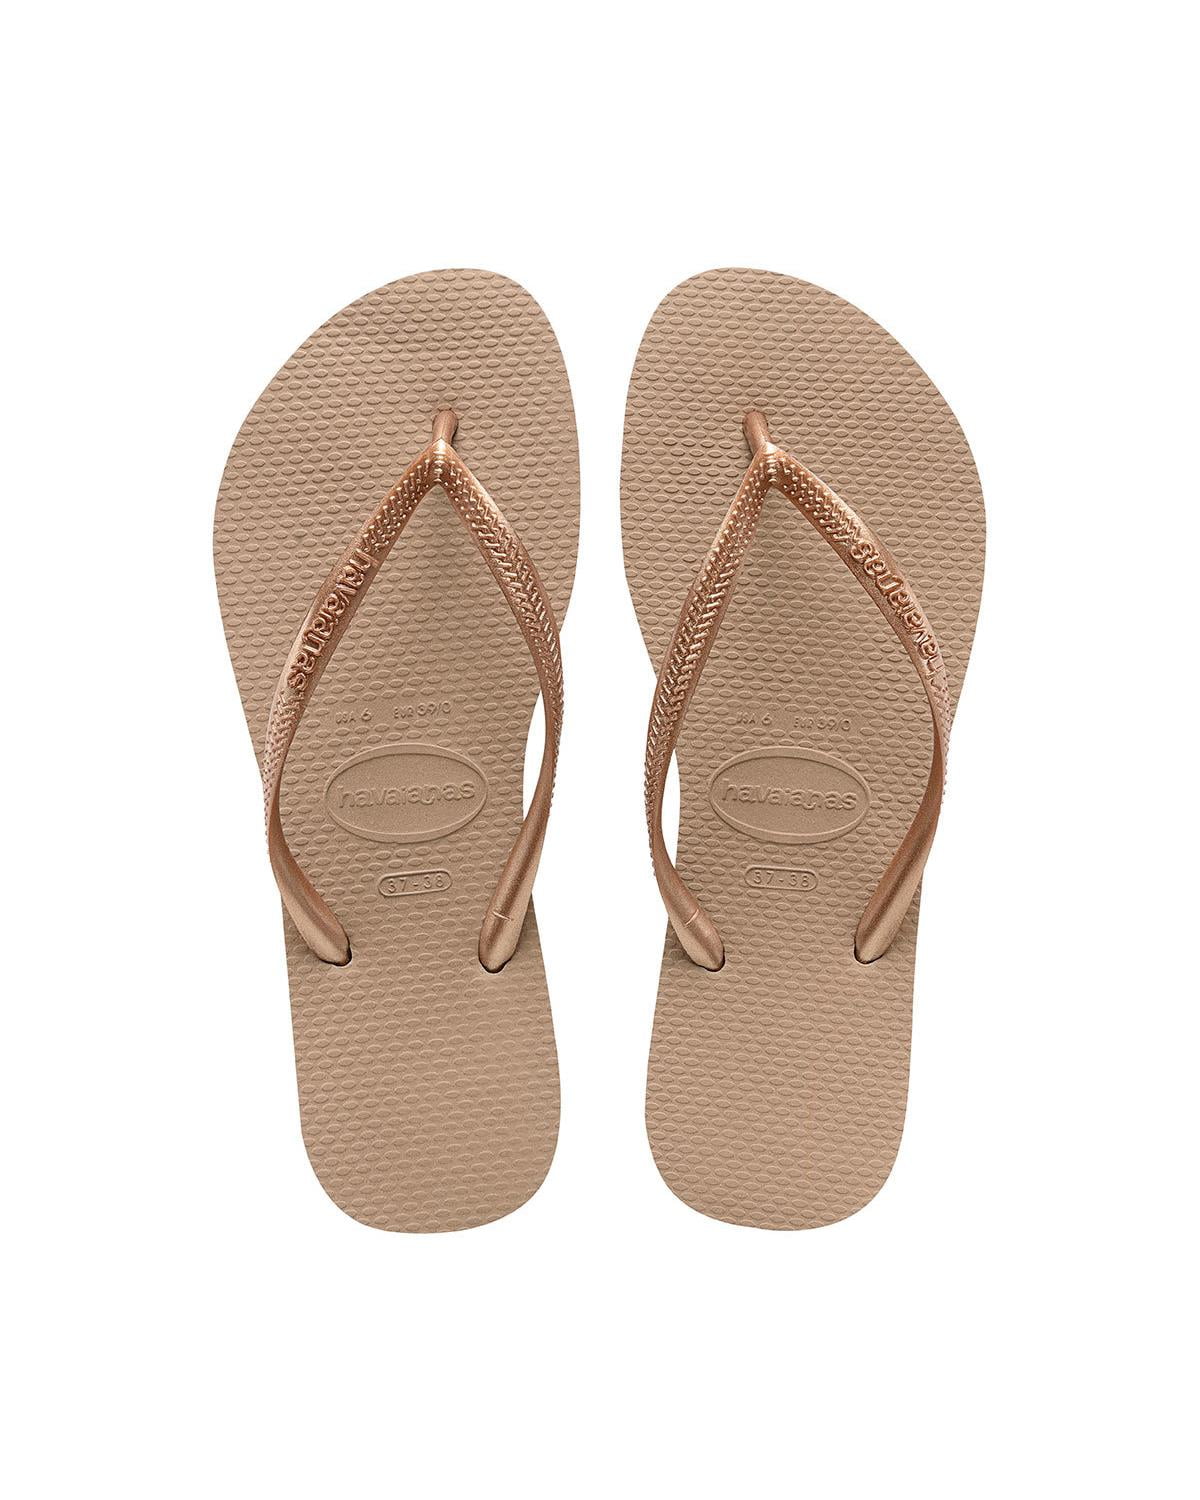 Save 19% Womens Shoes Flats and flat shoes Sandals and flip-flops Havaianas Slim Flat Flip Flop 6.5 Beige in Natural 